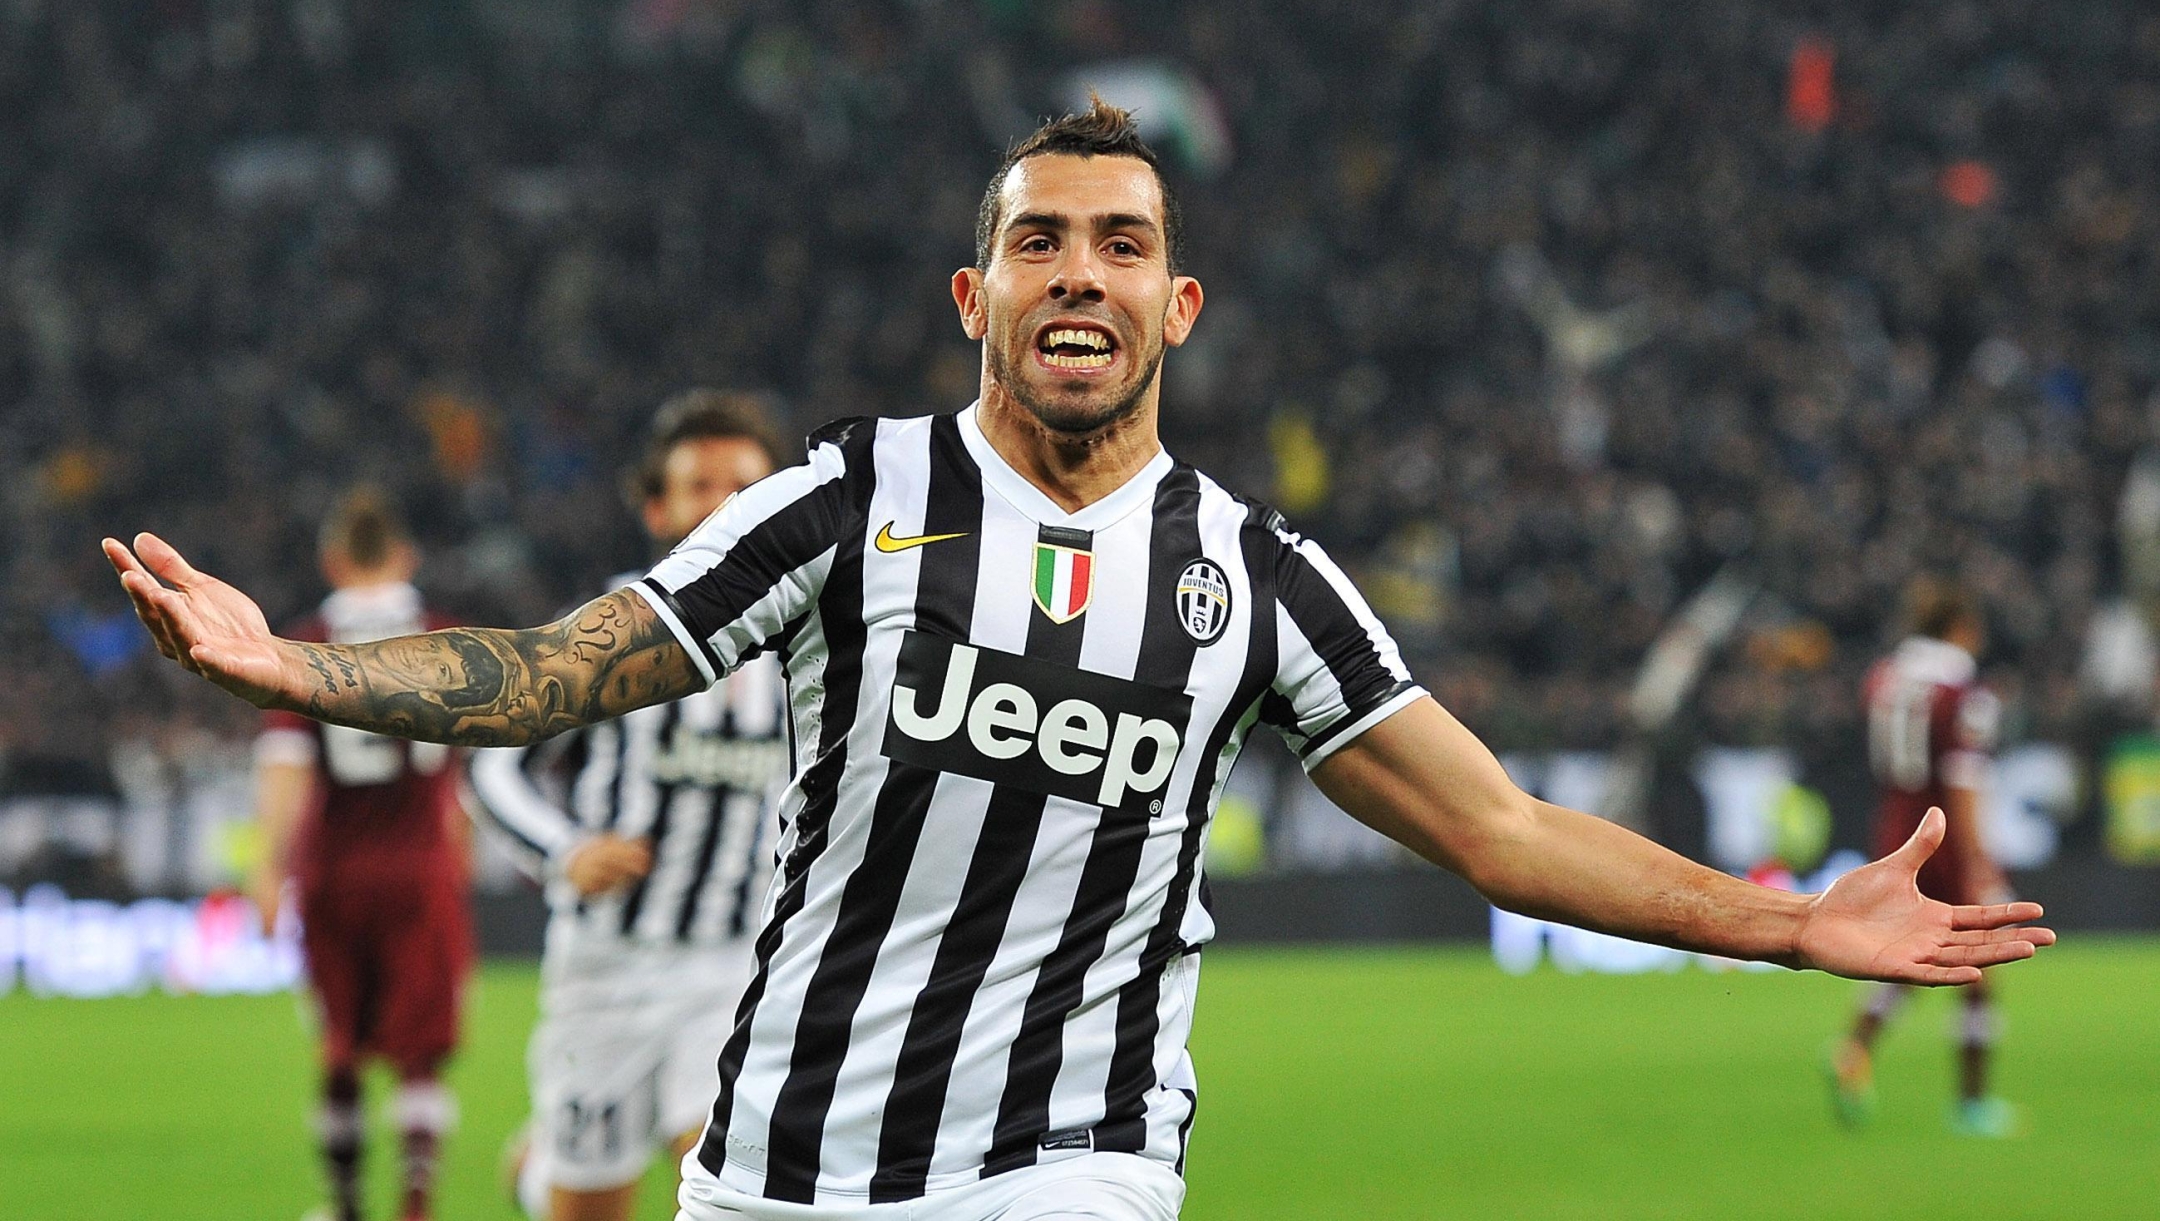 Argentinian forward of Juventus Fc Carlos Tevez celebrates after scoring the 1-0 goal lead during Italian Serie A soccer match between Juventus Fc and Torino Fc at the Juventus Stadium, Turin, 23 February 2014. ANSA/DI MARCO